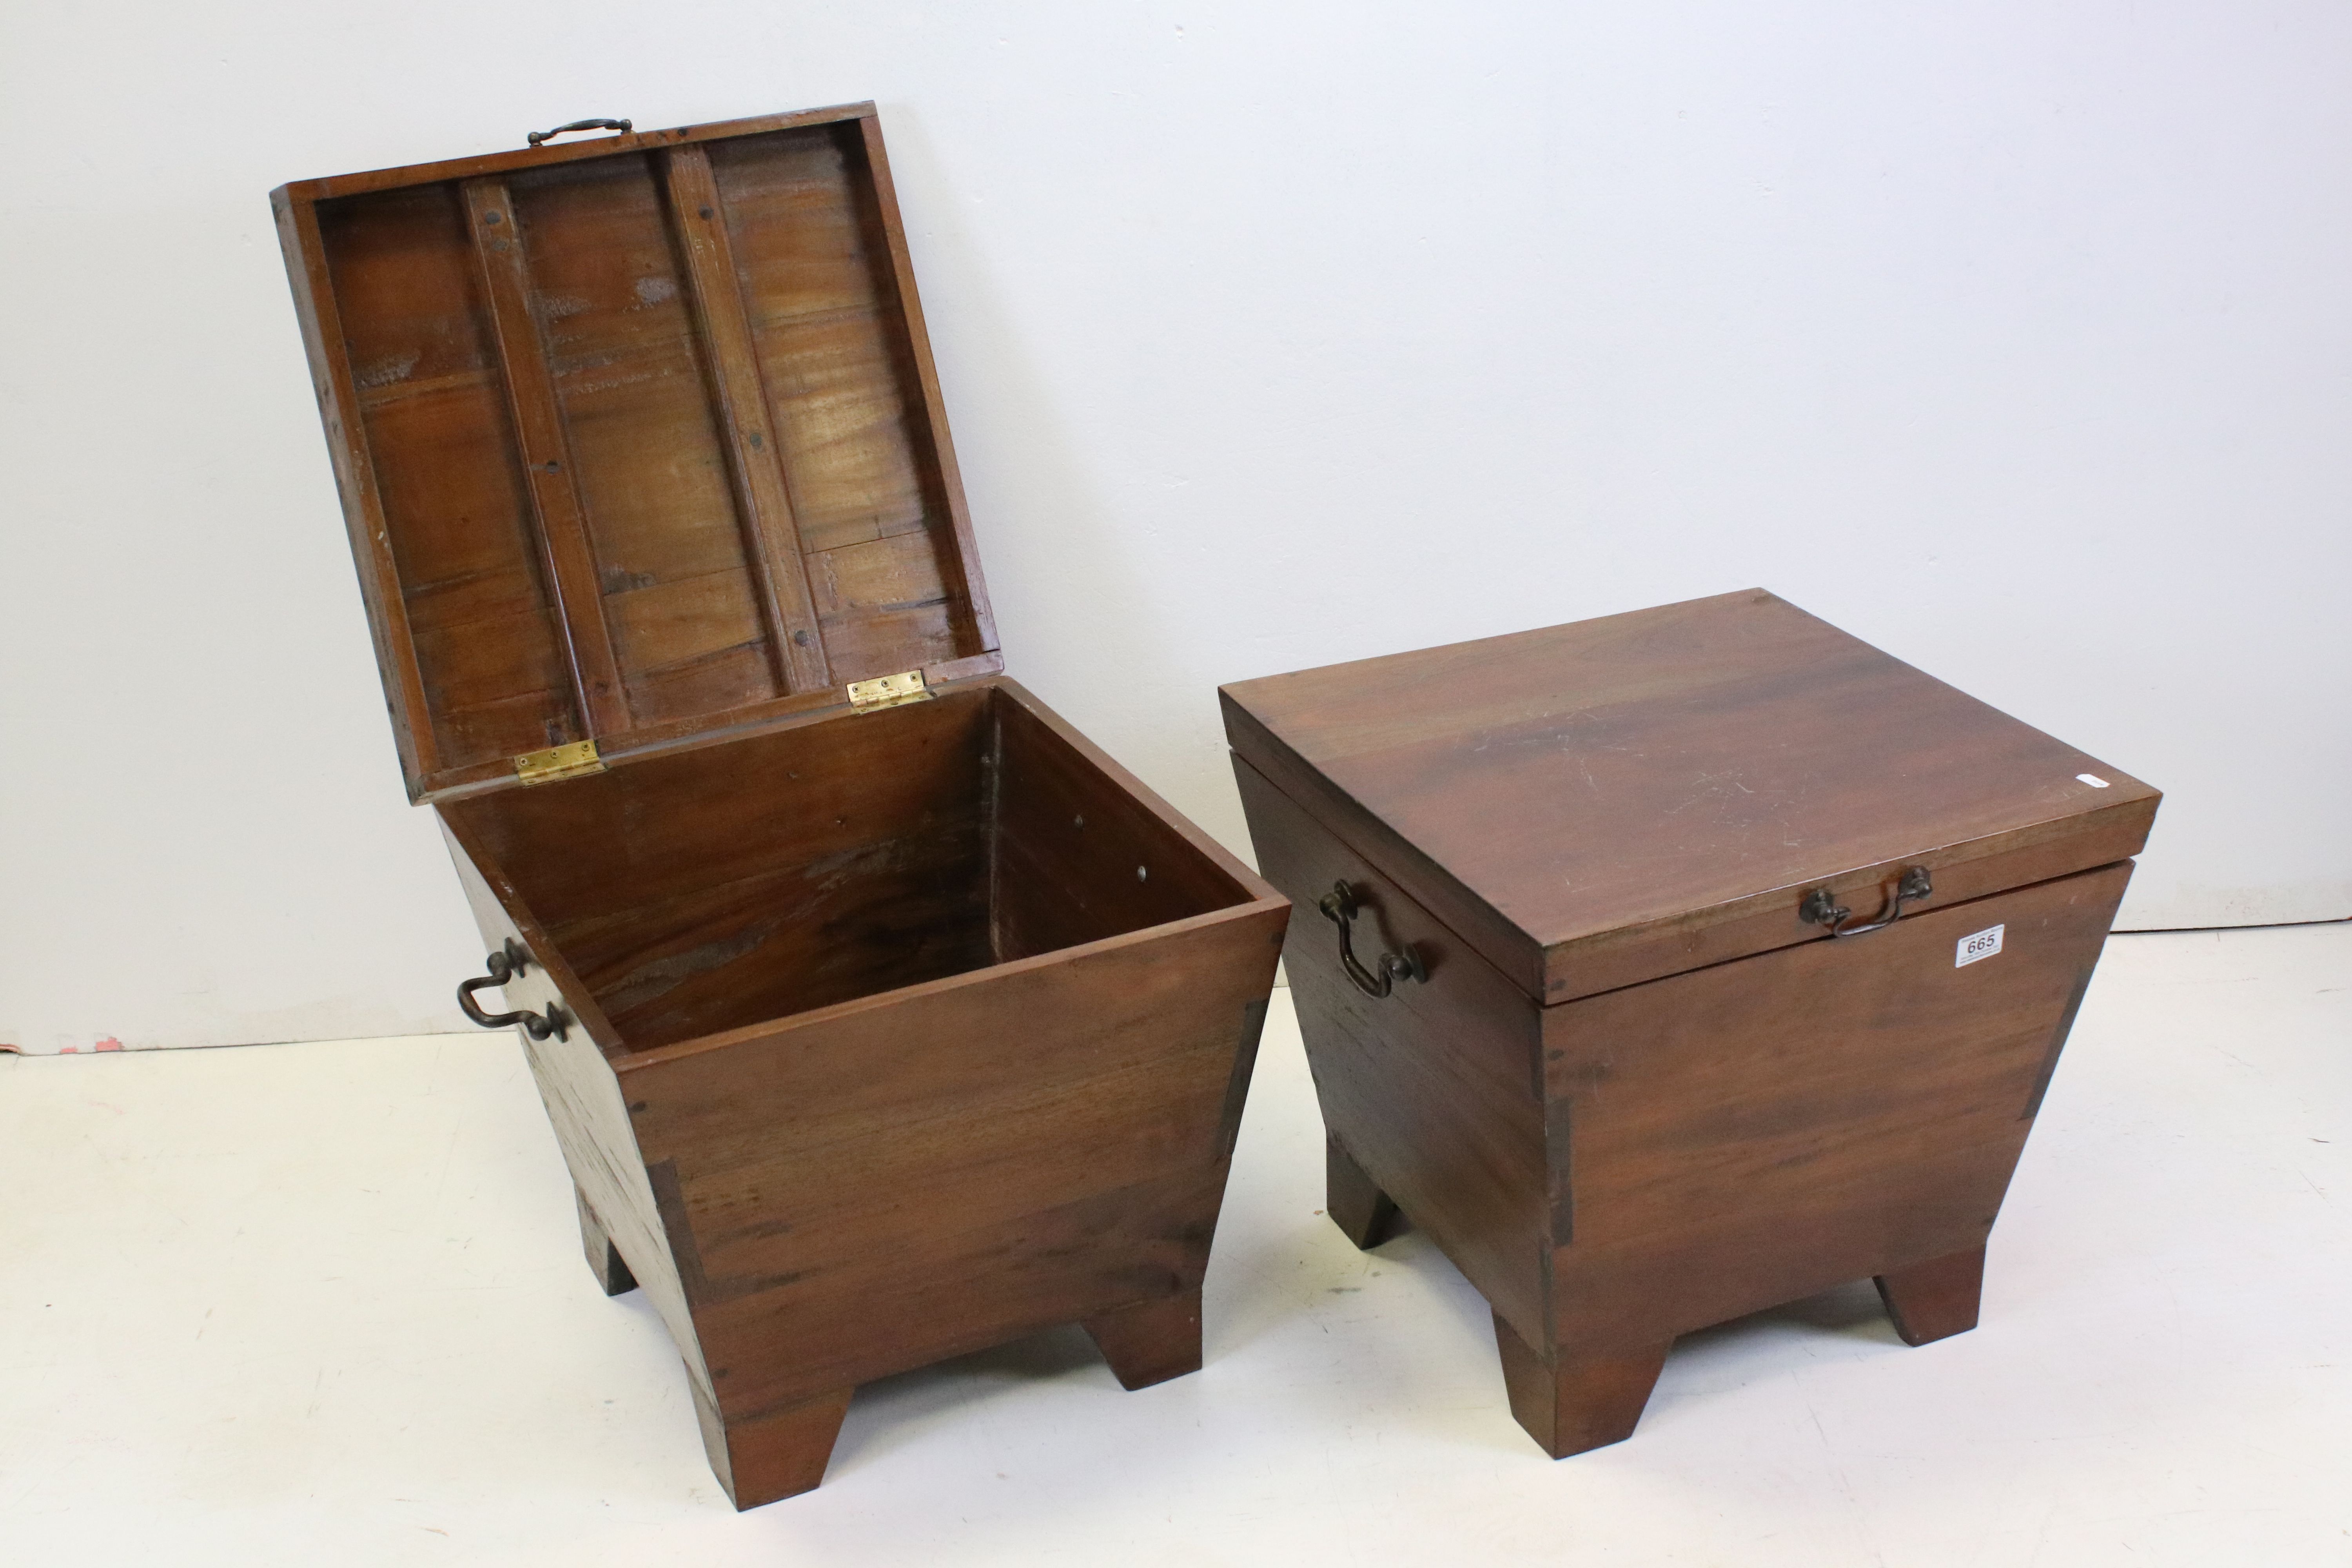 Pair of Hardwood Square Storage Boxes of sarcophagus form, 50cms wide x 46cms high